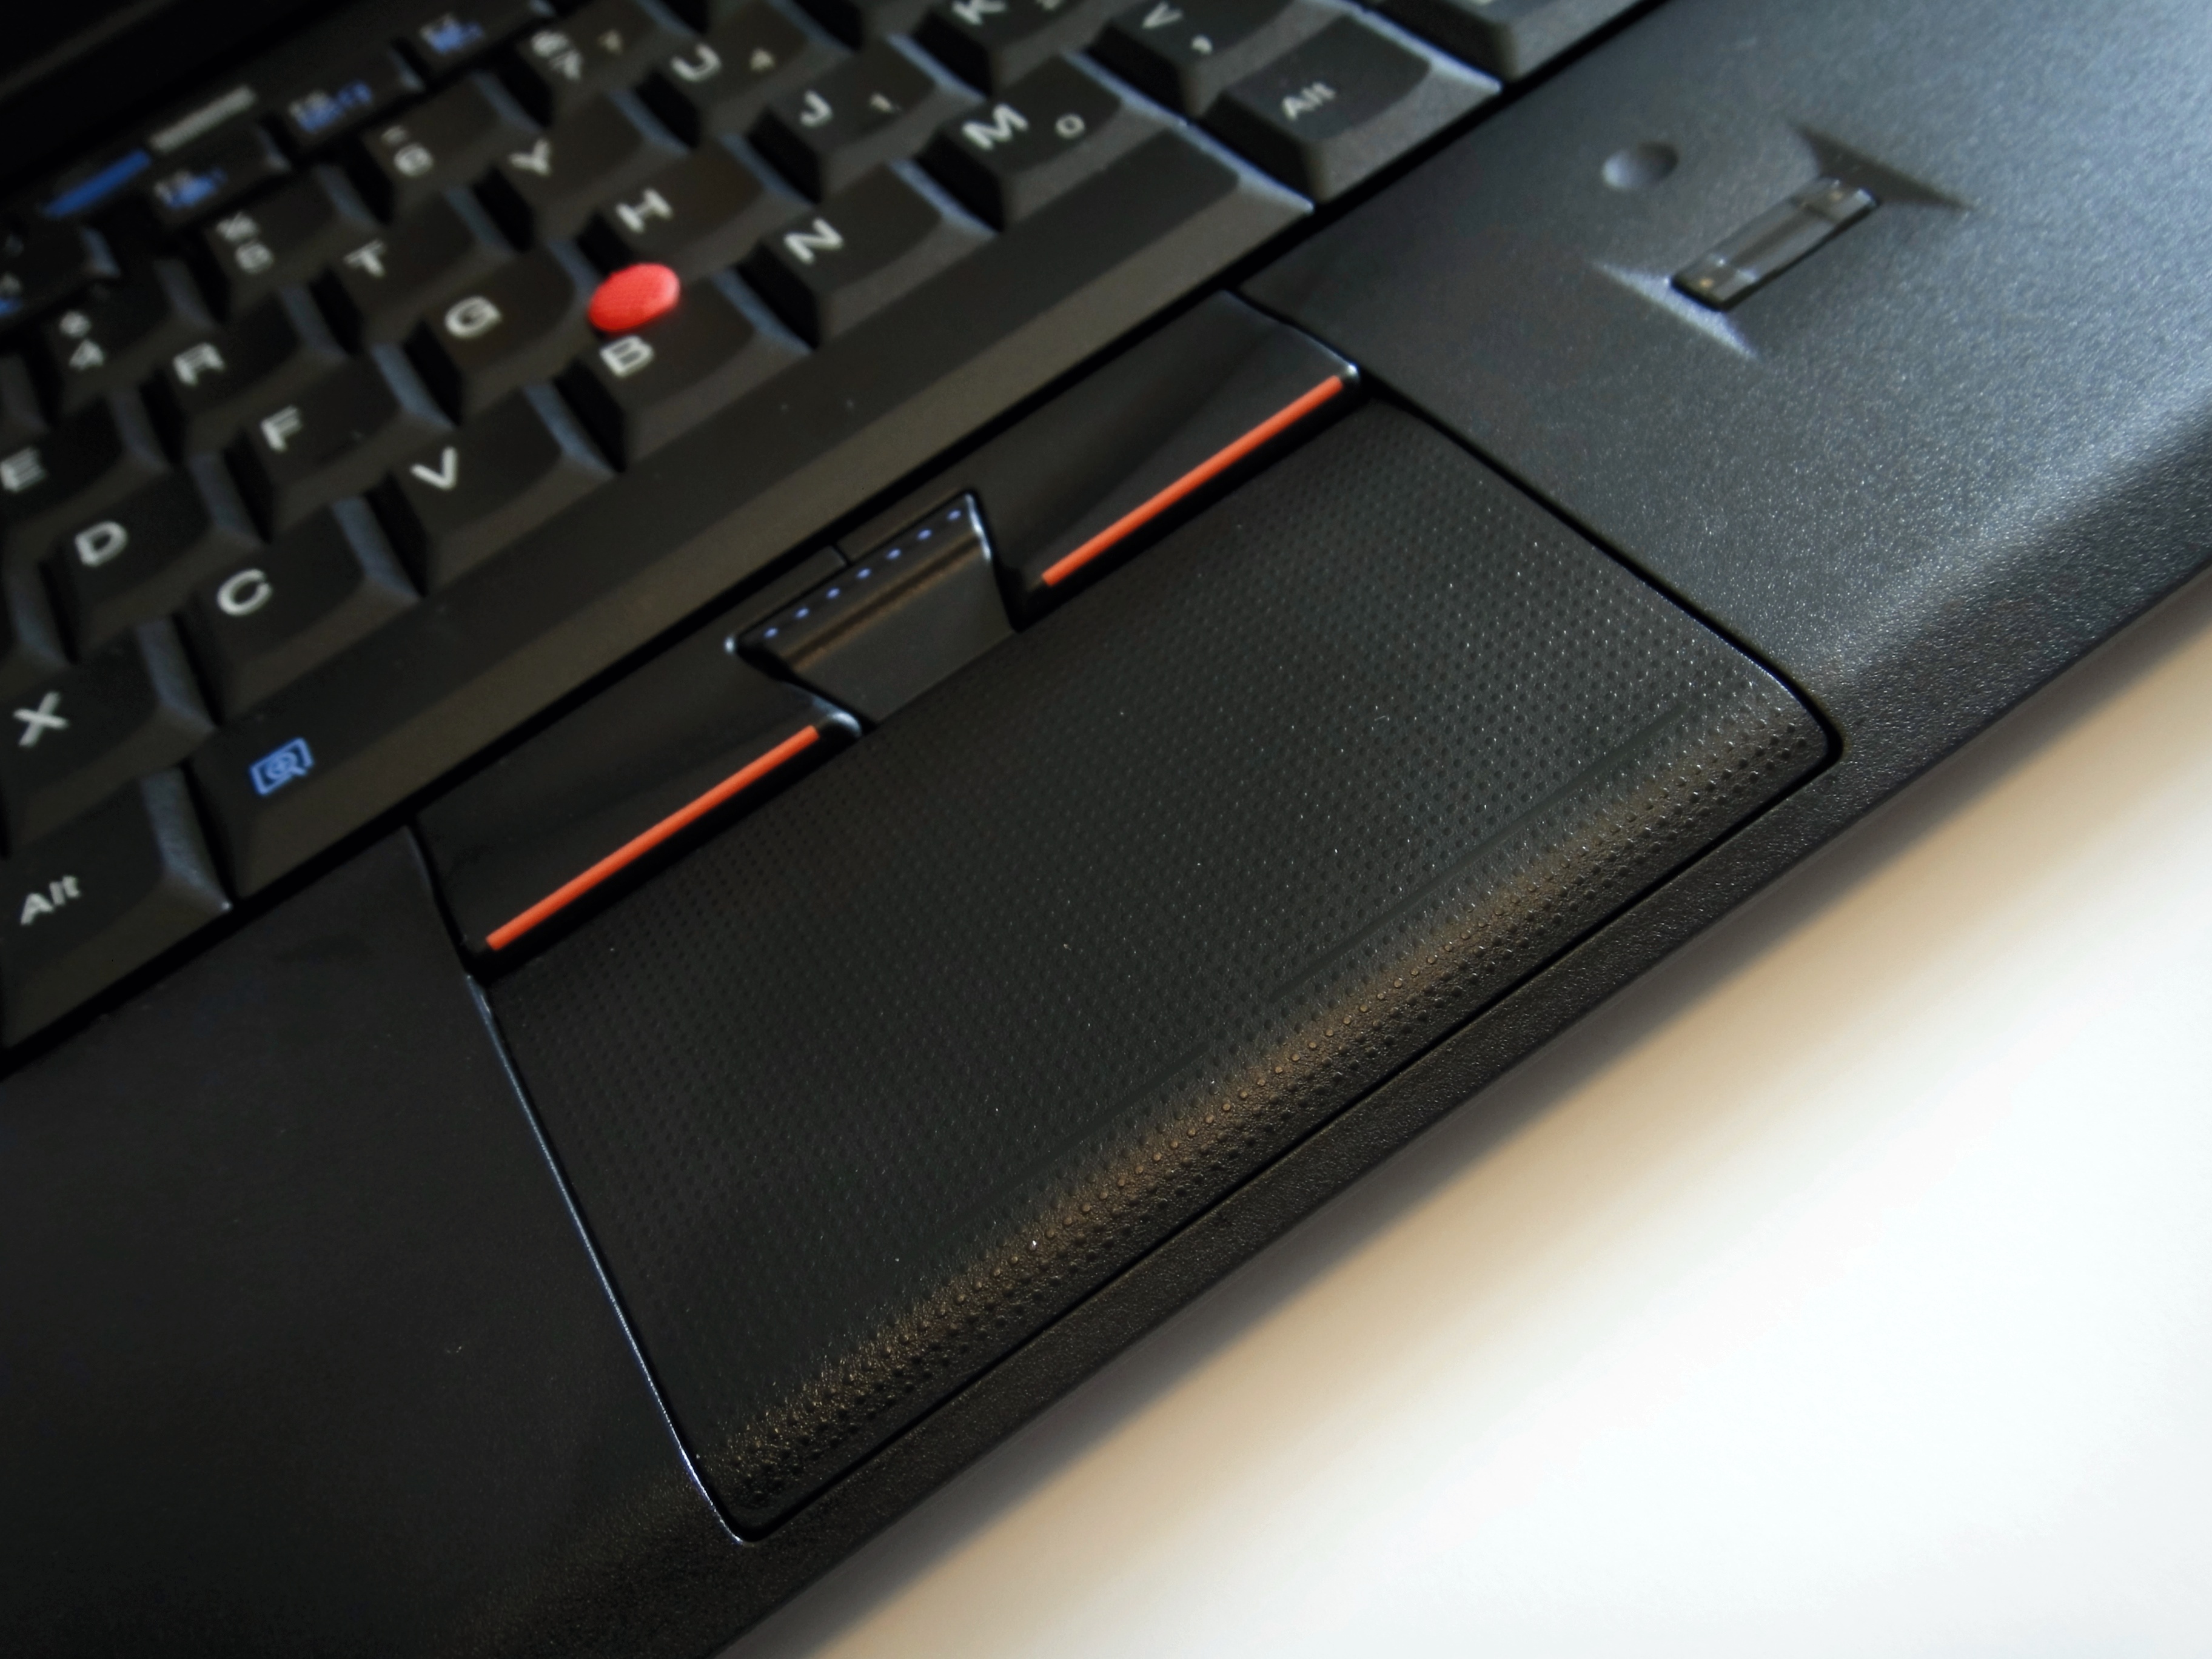 Lenovo ThinkPad X220 Hands On, Details, Specs And Video